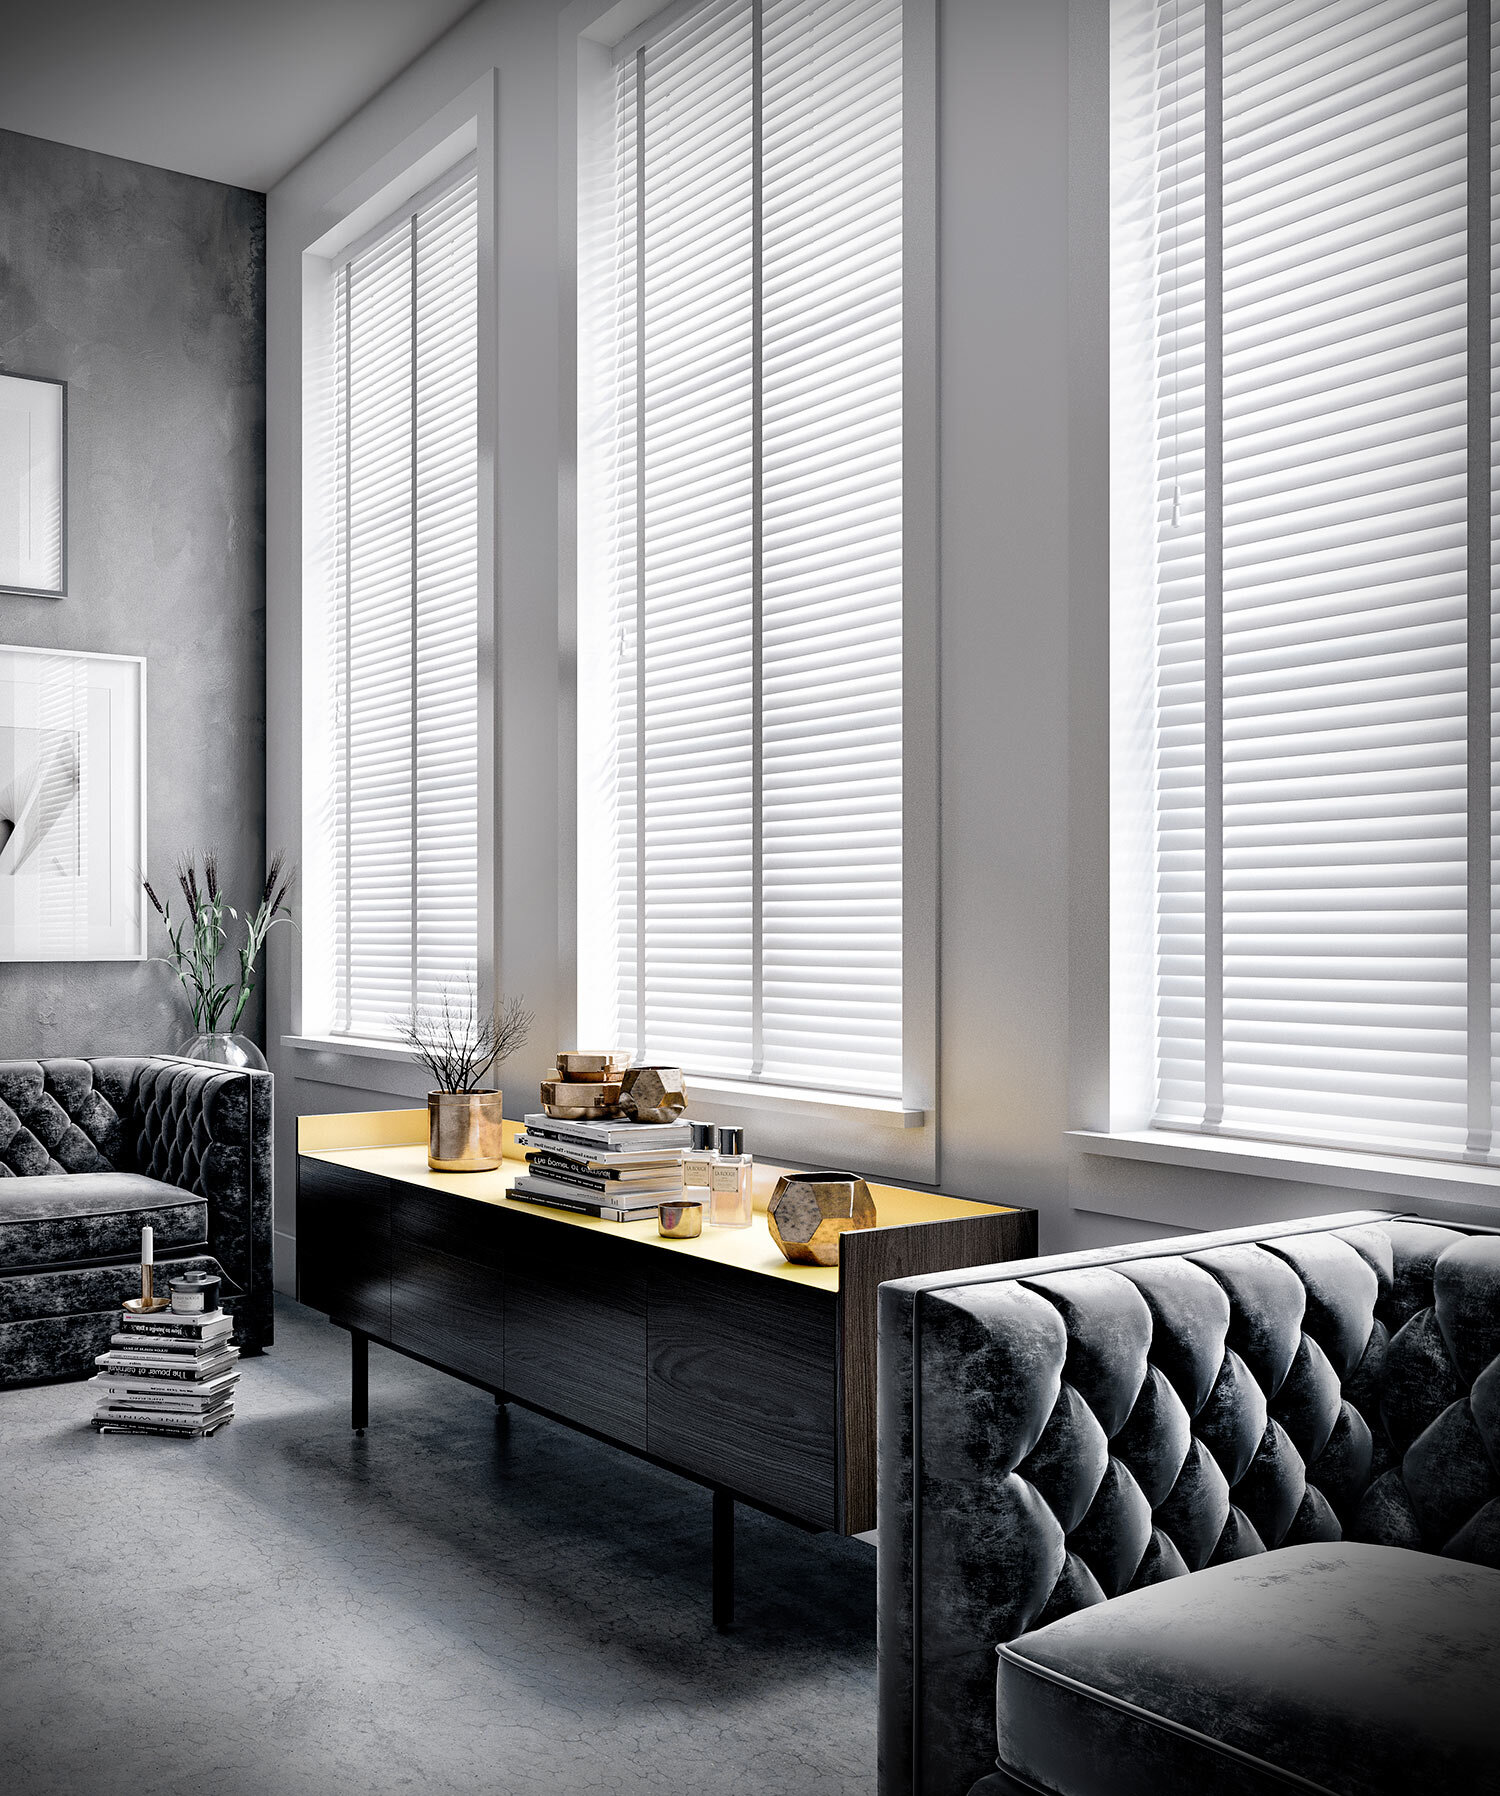 Motorised Window Blinds London and UK. Remote, voice or app controlled these electric window blinds are modern window coverings than can either be mains or battery powered as a retro fit solution. 